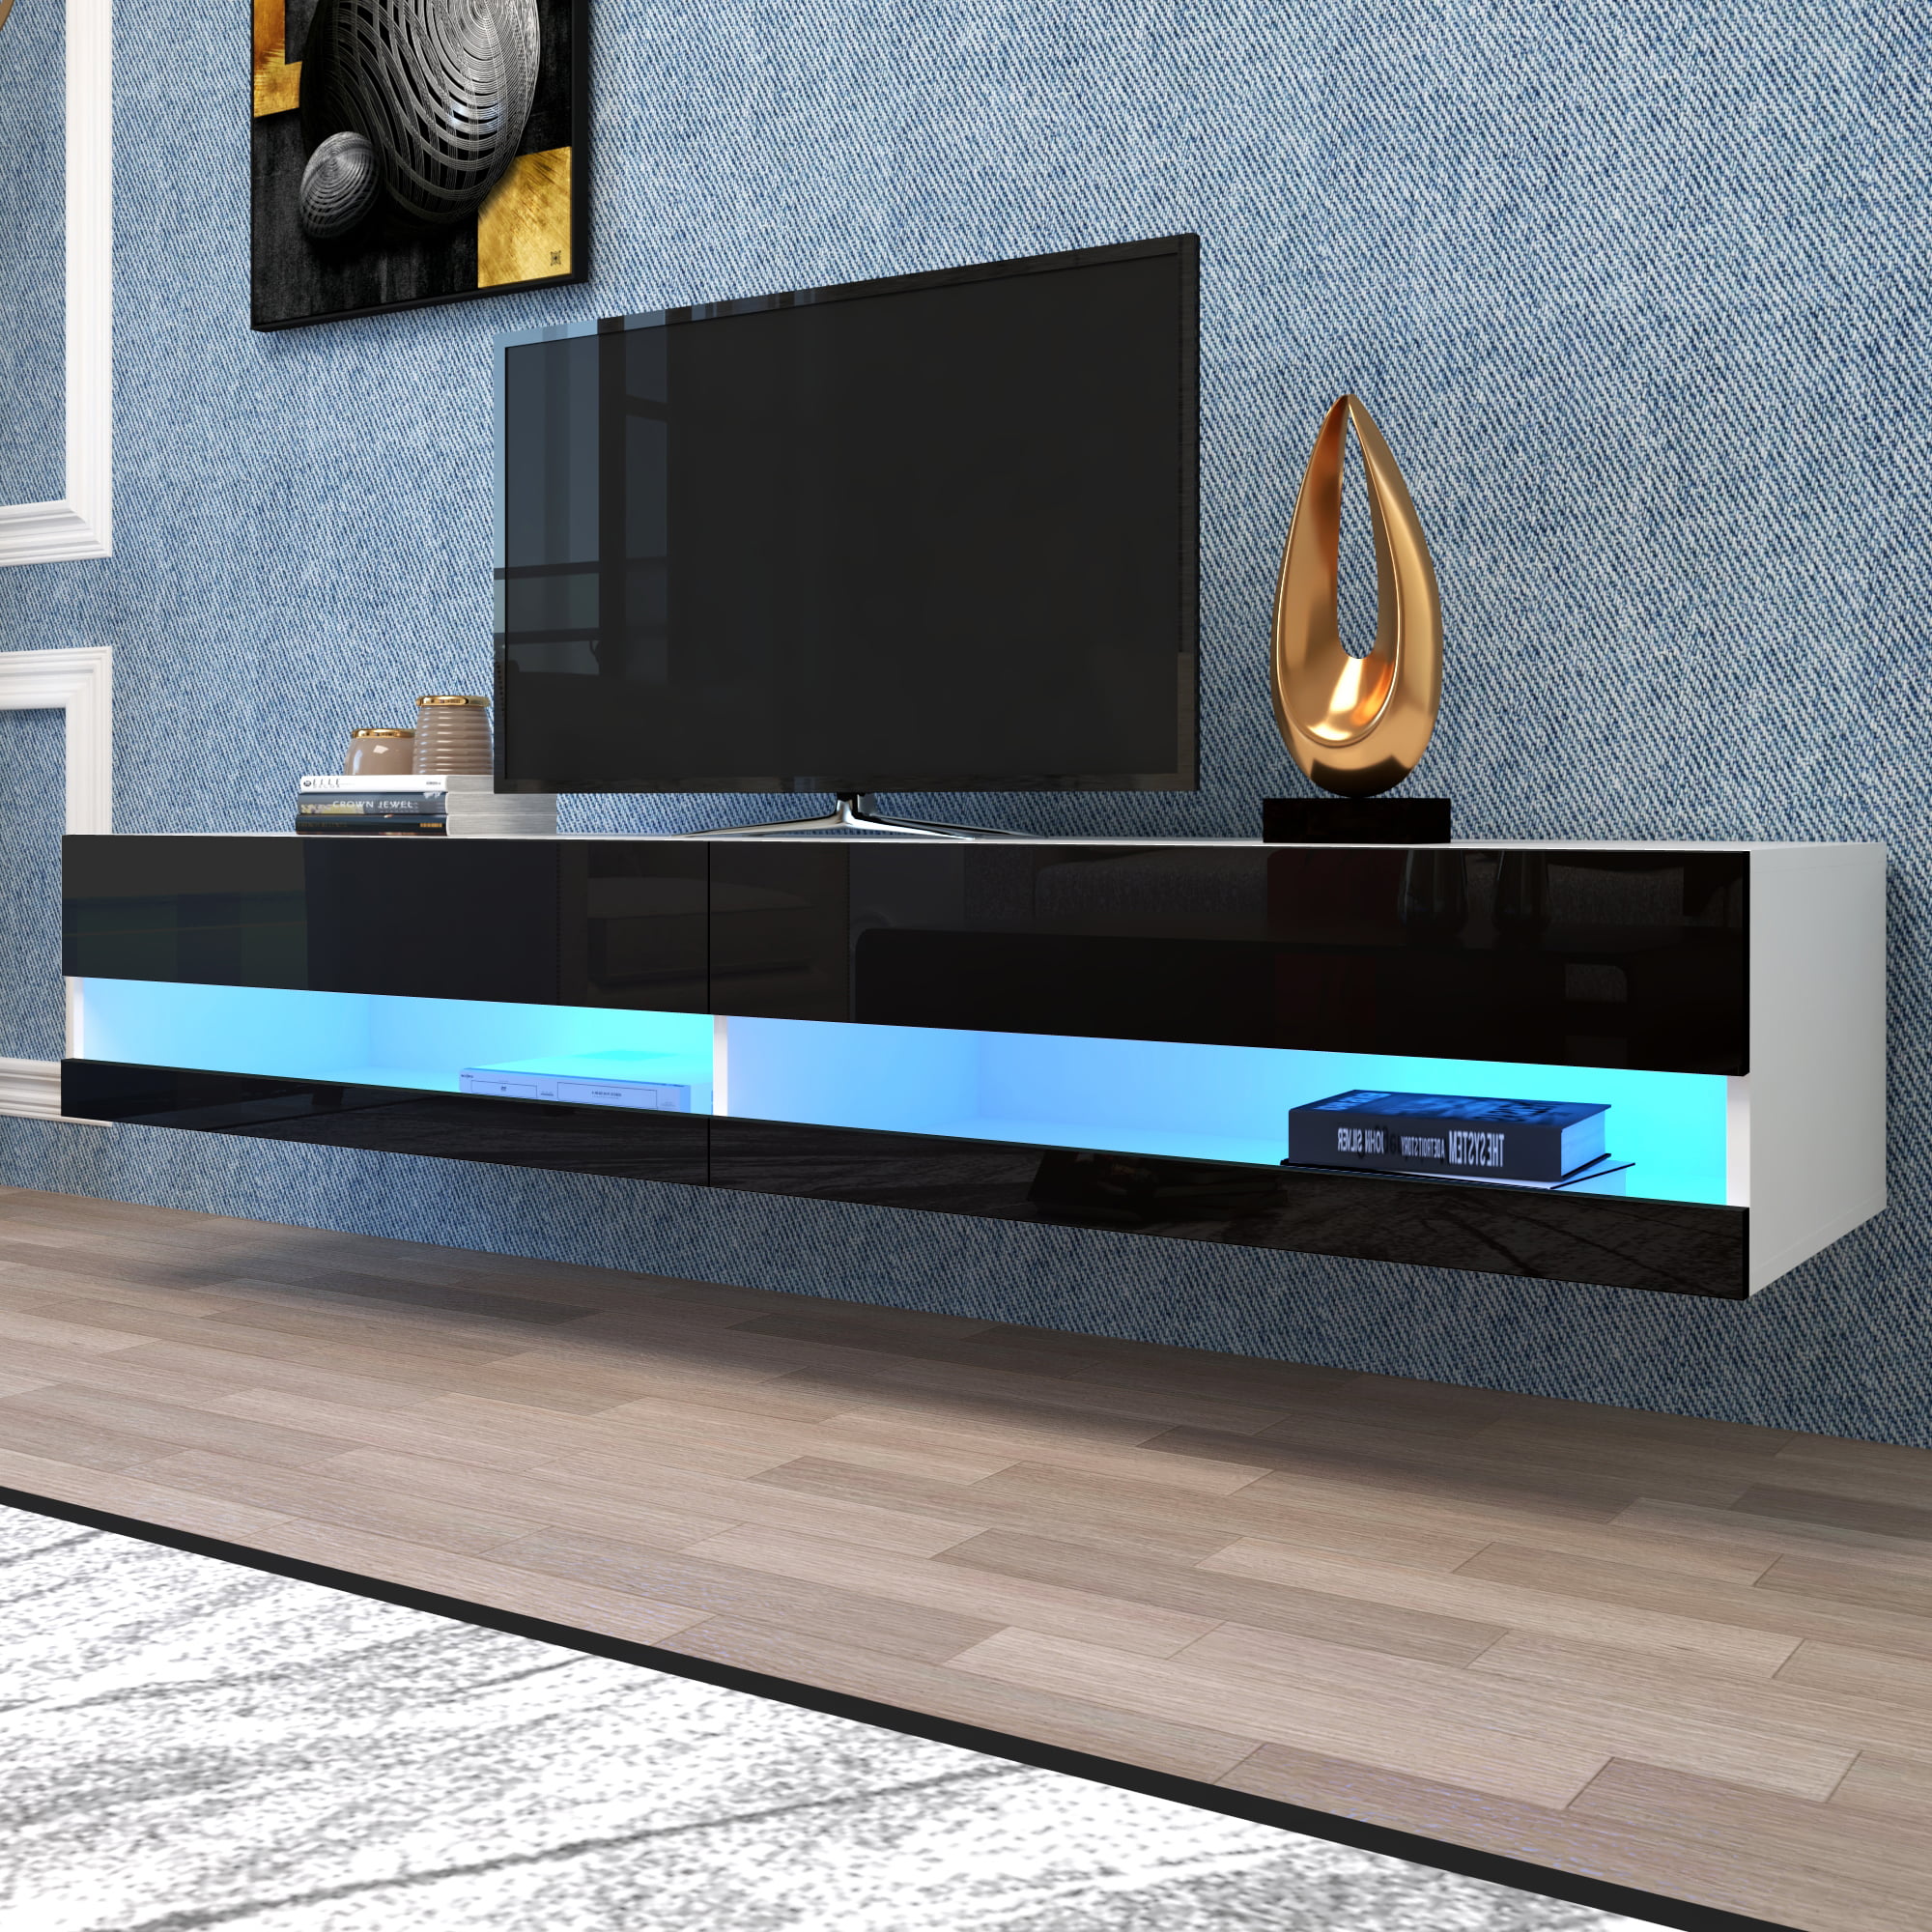 Details about   High Gloss 80in Wall Mounted Floating LED TV Stand Table with Storage Cabinet 